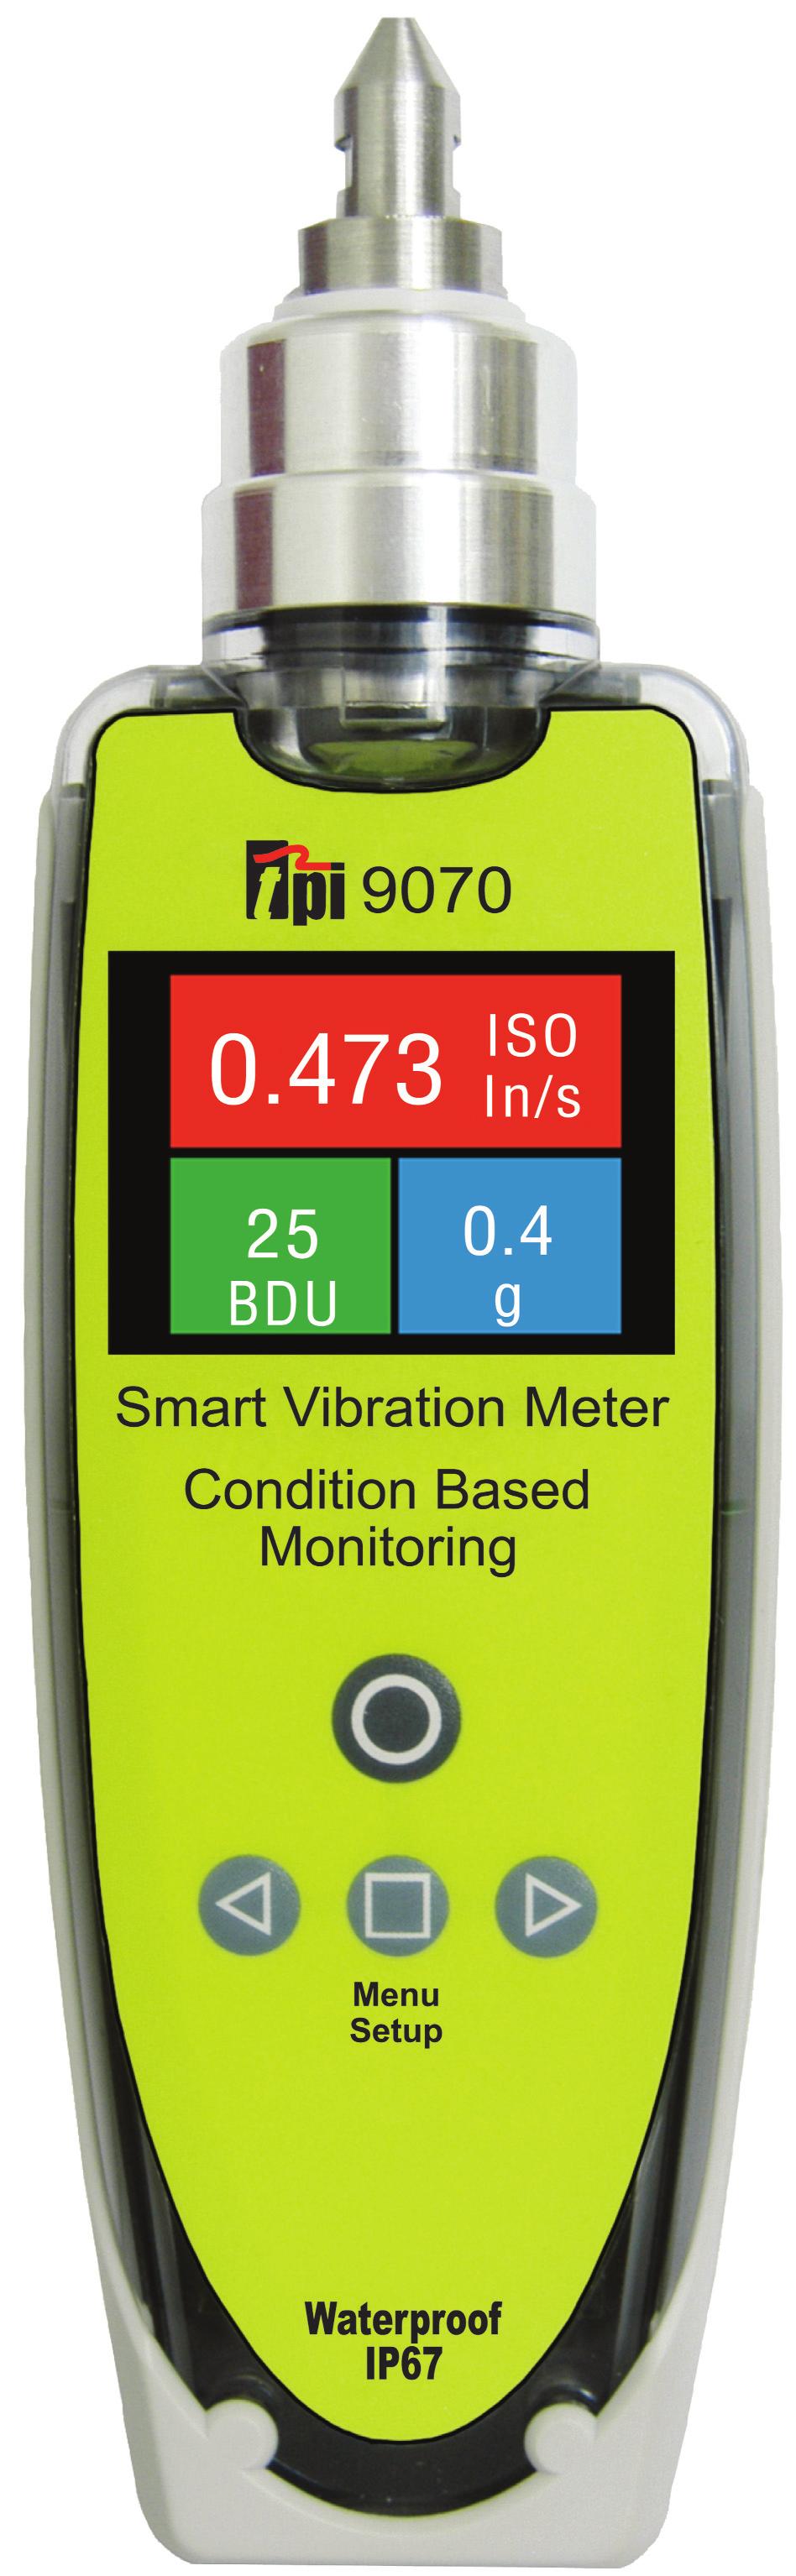 9070 Smart Vibration Meter Instruction Manual Overall machine